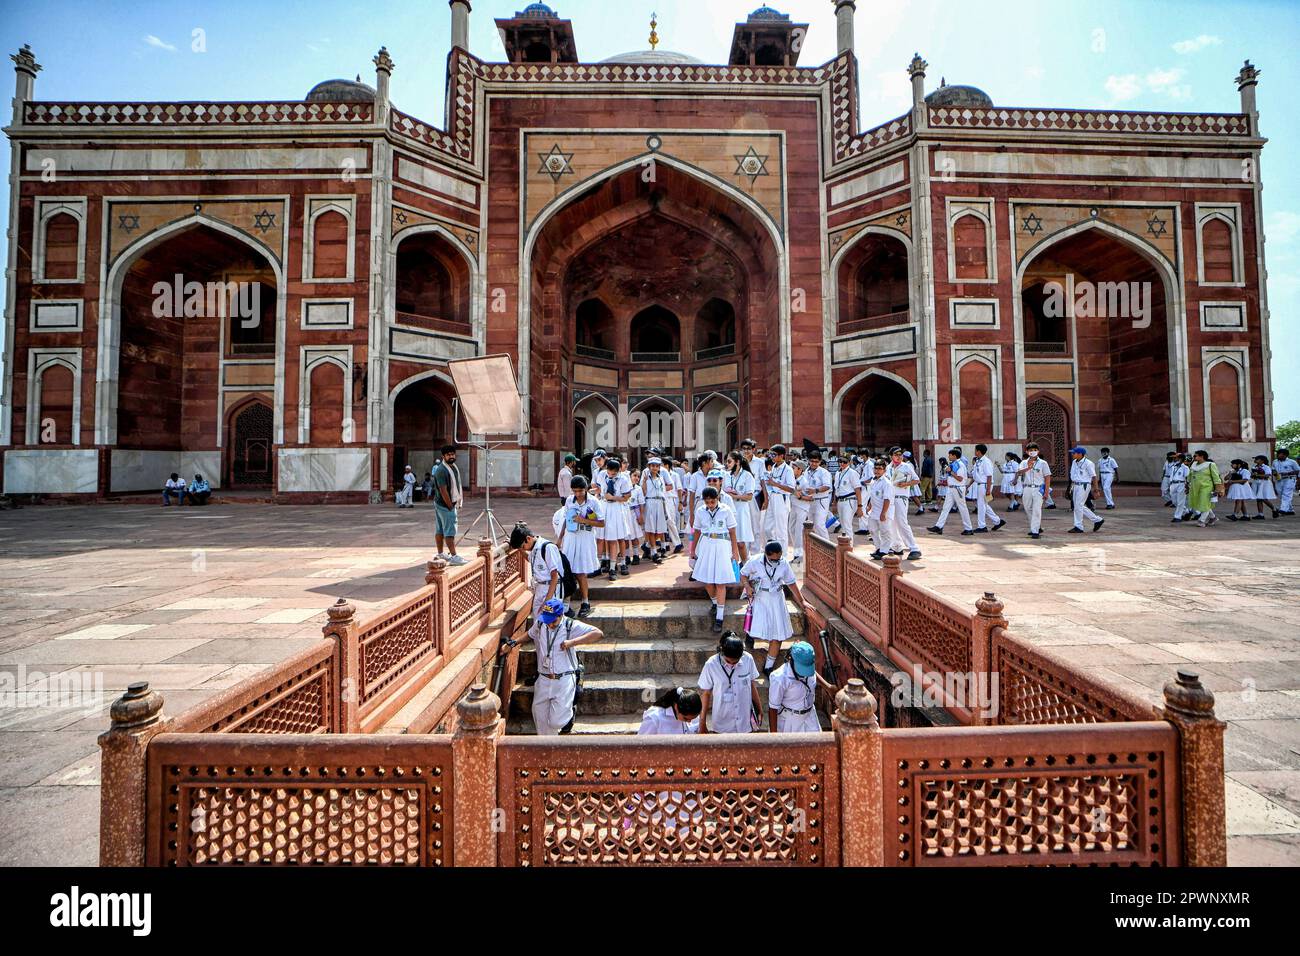 Delhi, India. 21st Apr, 2023. School students seen on an Educational tour at the Humayun Tomb in New Delhi. Humayun's Tomb is a grand dynastic mausoleum that was to become synonyms of Mughal architecture. The mausoleum was completed in the year 1570 and contains the tombs of Emperor Humayun as well Bega Begum, Hamida Begum, and Dara Shikoh. The tomb was the first garden-tomb on the Indian subcontinent. (Photo by Avishek Das/SOPA Images/Sipa USA) Credit: Sipa USA/Alamy Live News Stock Photo